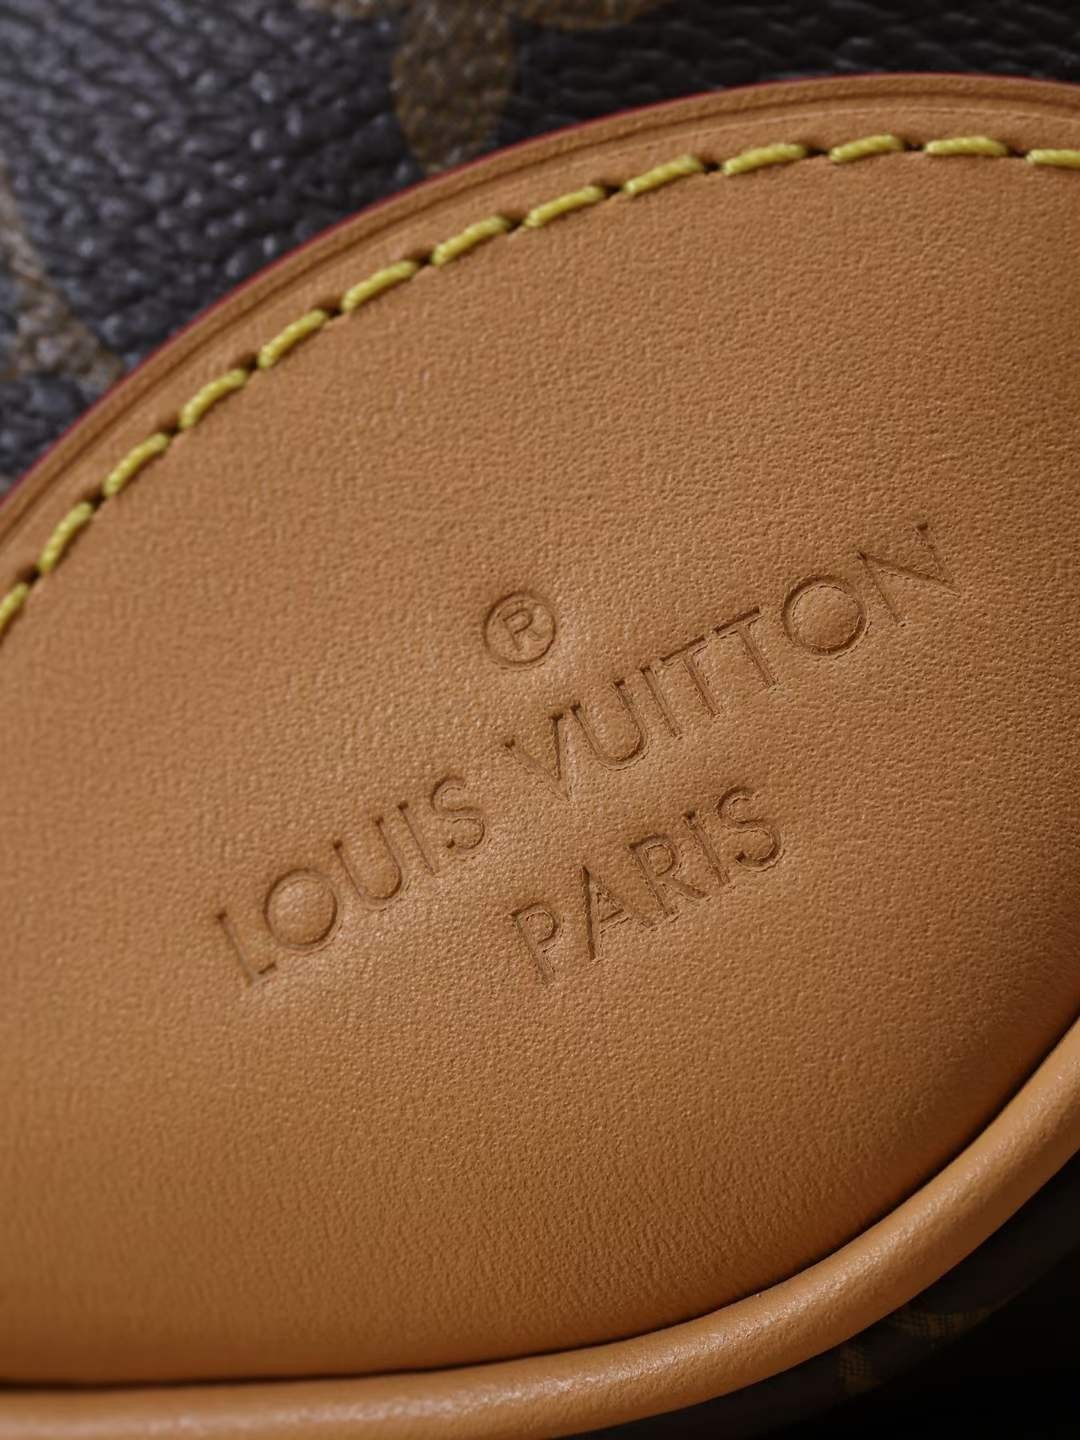 Louis Vuitton M45832 Boulogne Top Replica Handbag Overall Appearance (2022 Edition)-Best Quality Fake designer Bag Review, Replica designer bag ru